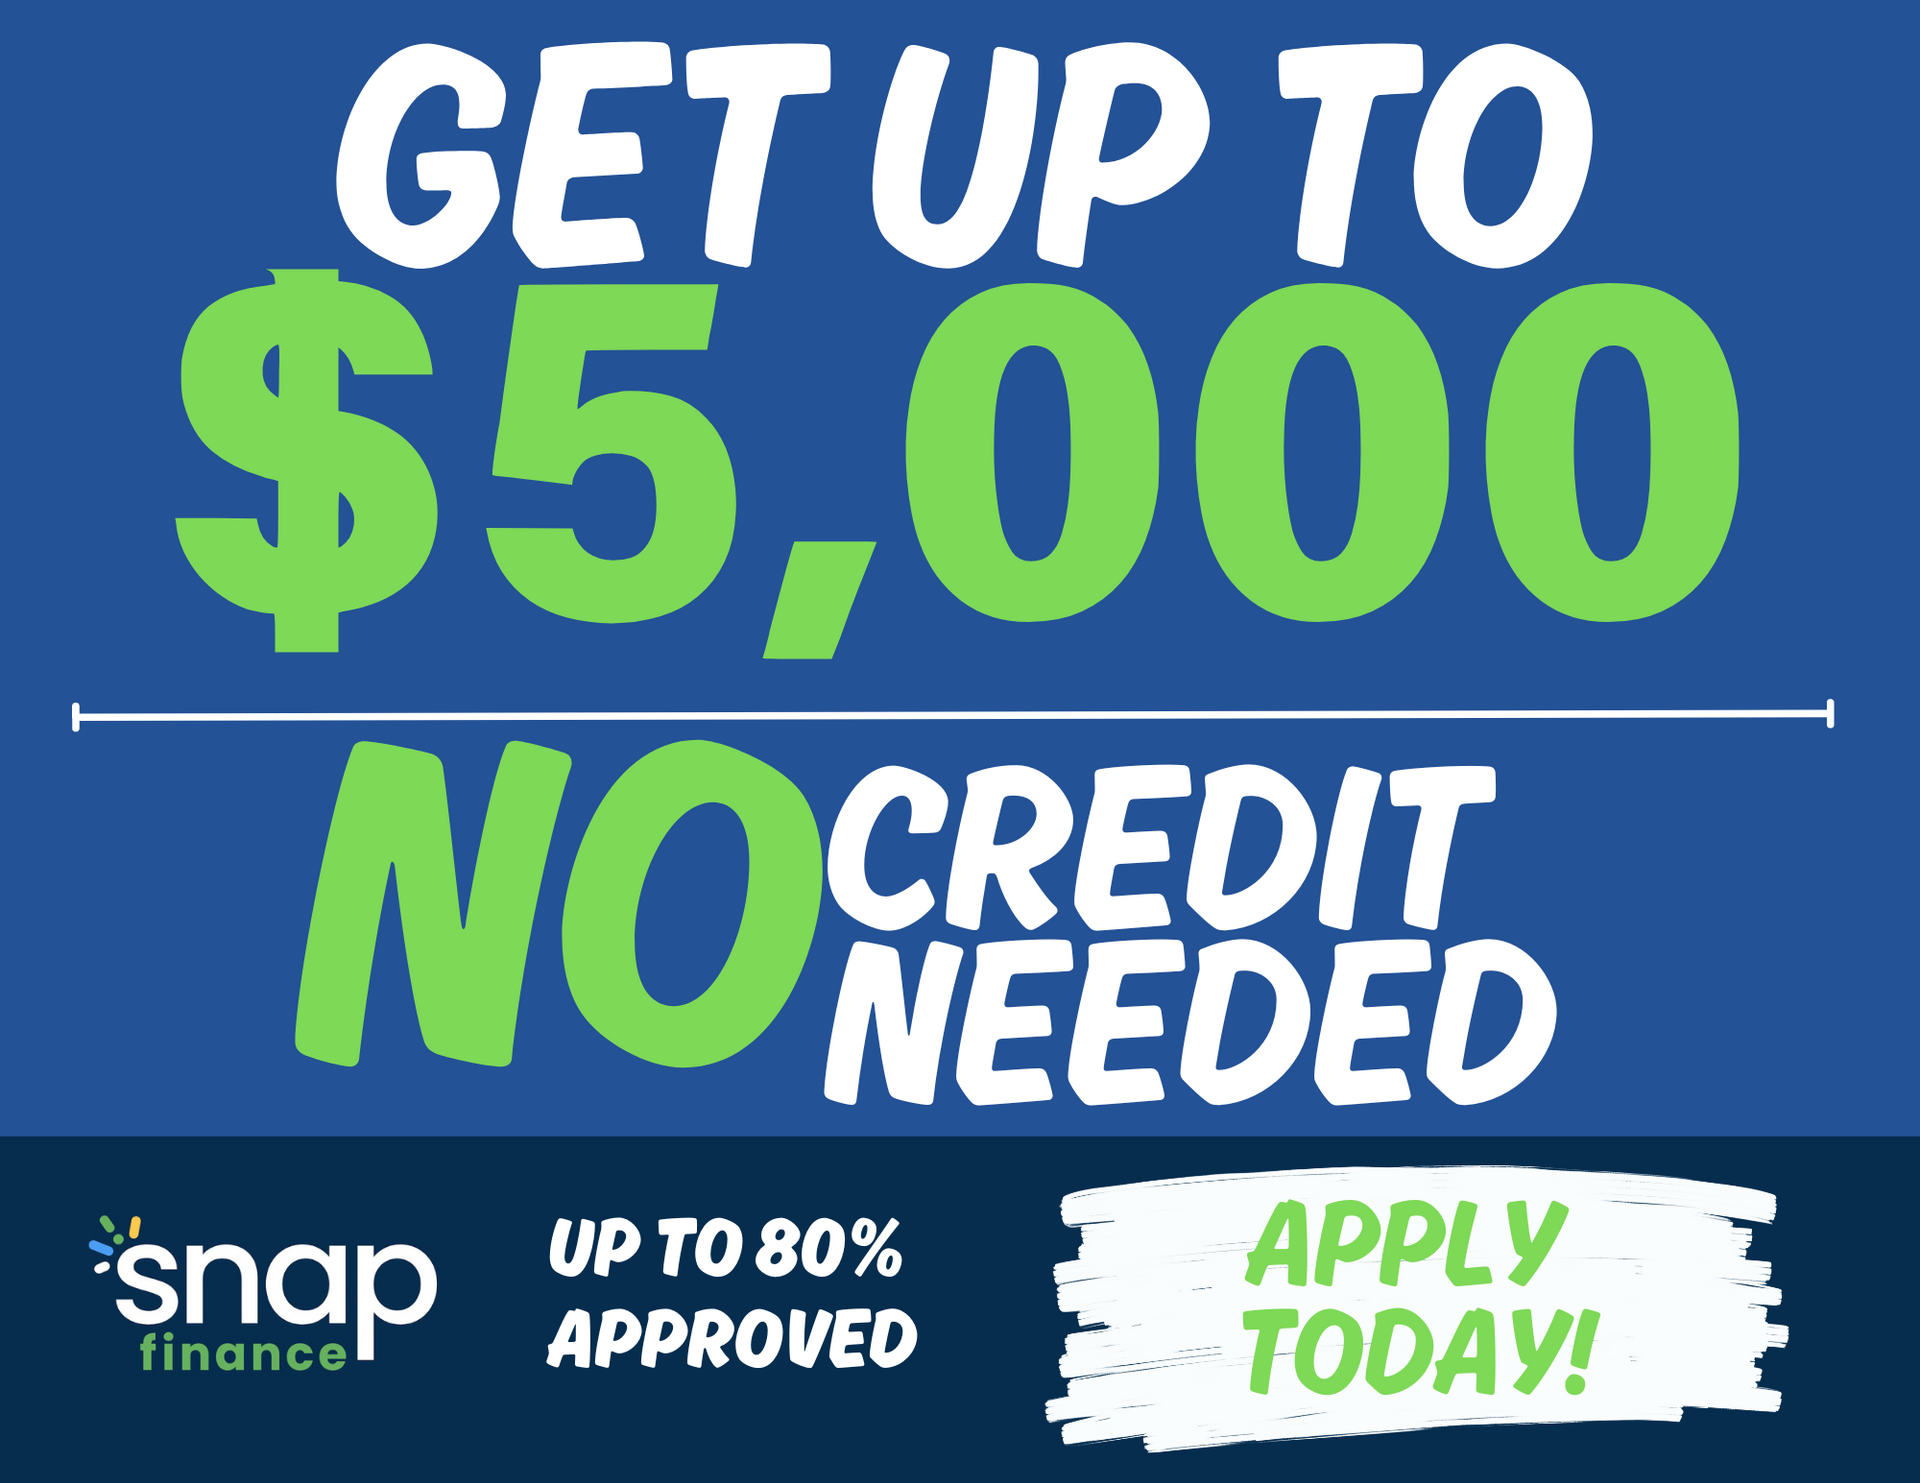 snap financing Westside Tire & Service Youngstown, Austintown  Niles Ohio